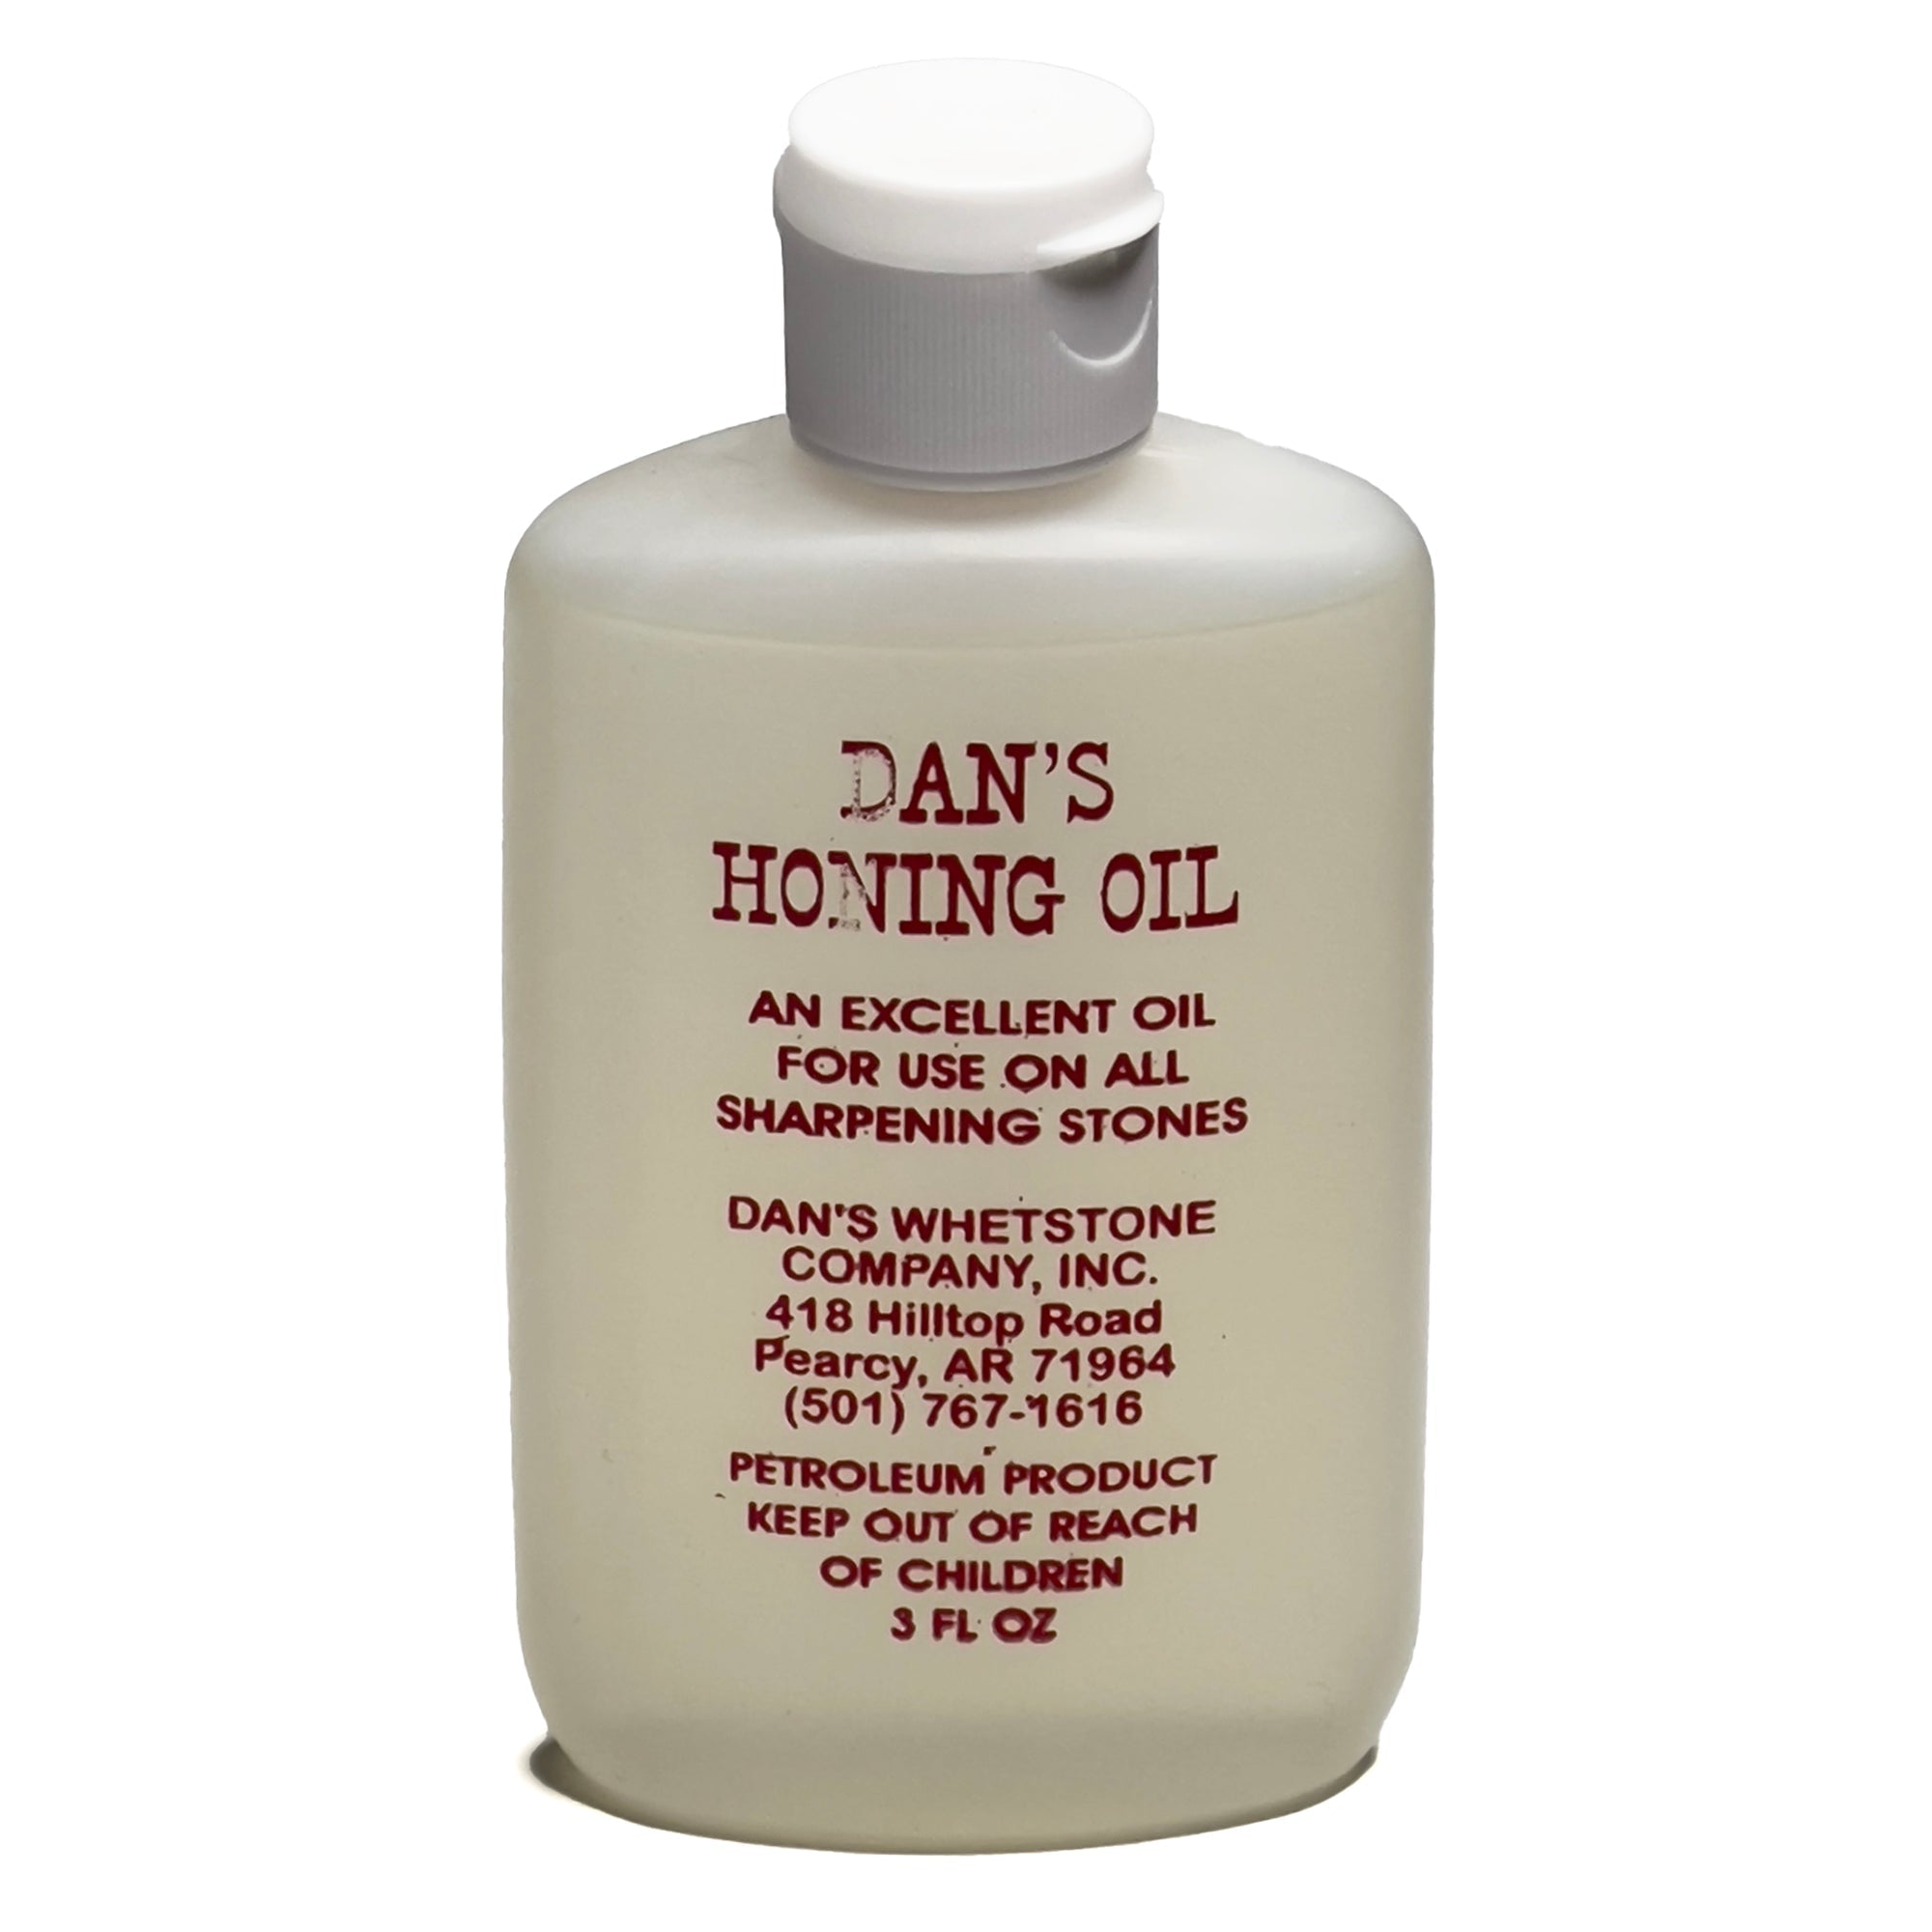 Honing Oil by Smith's 4 OZ. Bottle #HON1-4OZ. NEW